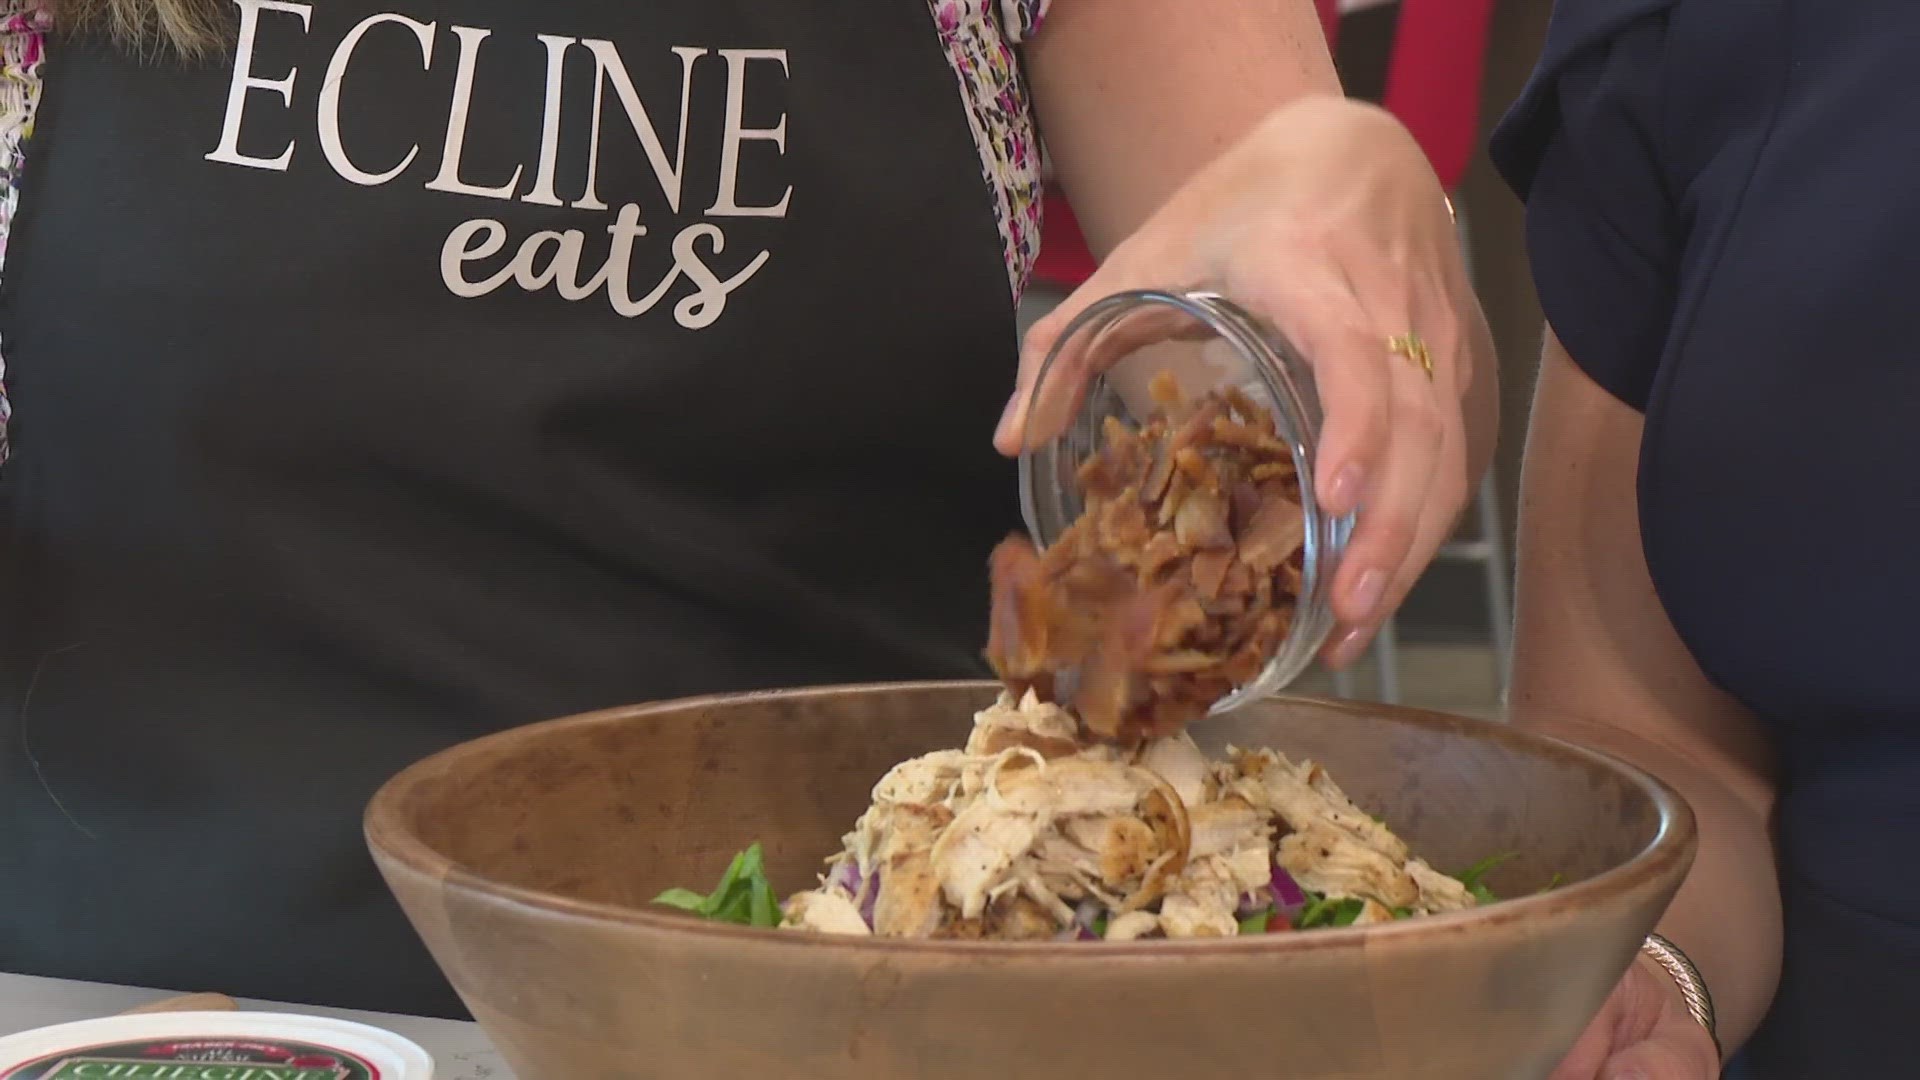 Emily Cline shows you how to whip up a simple summer salad.